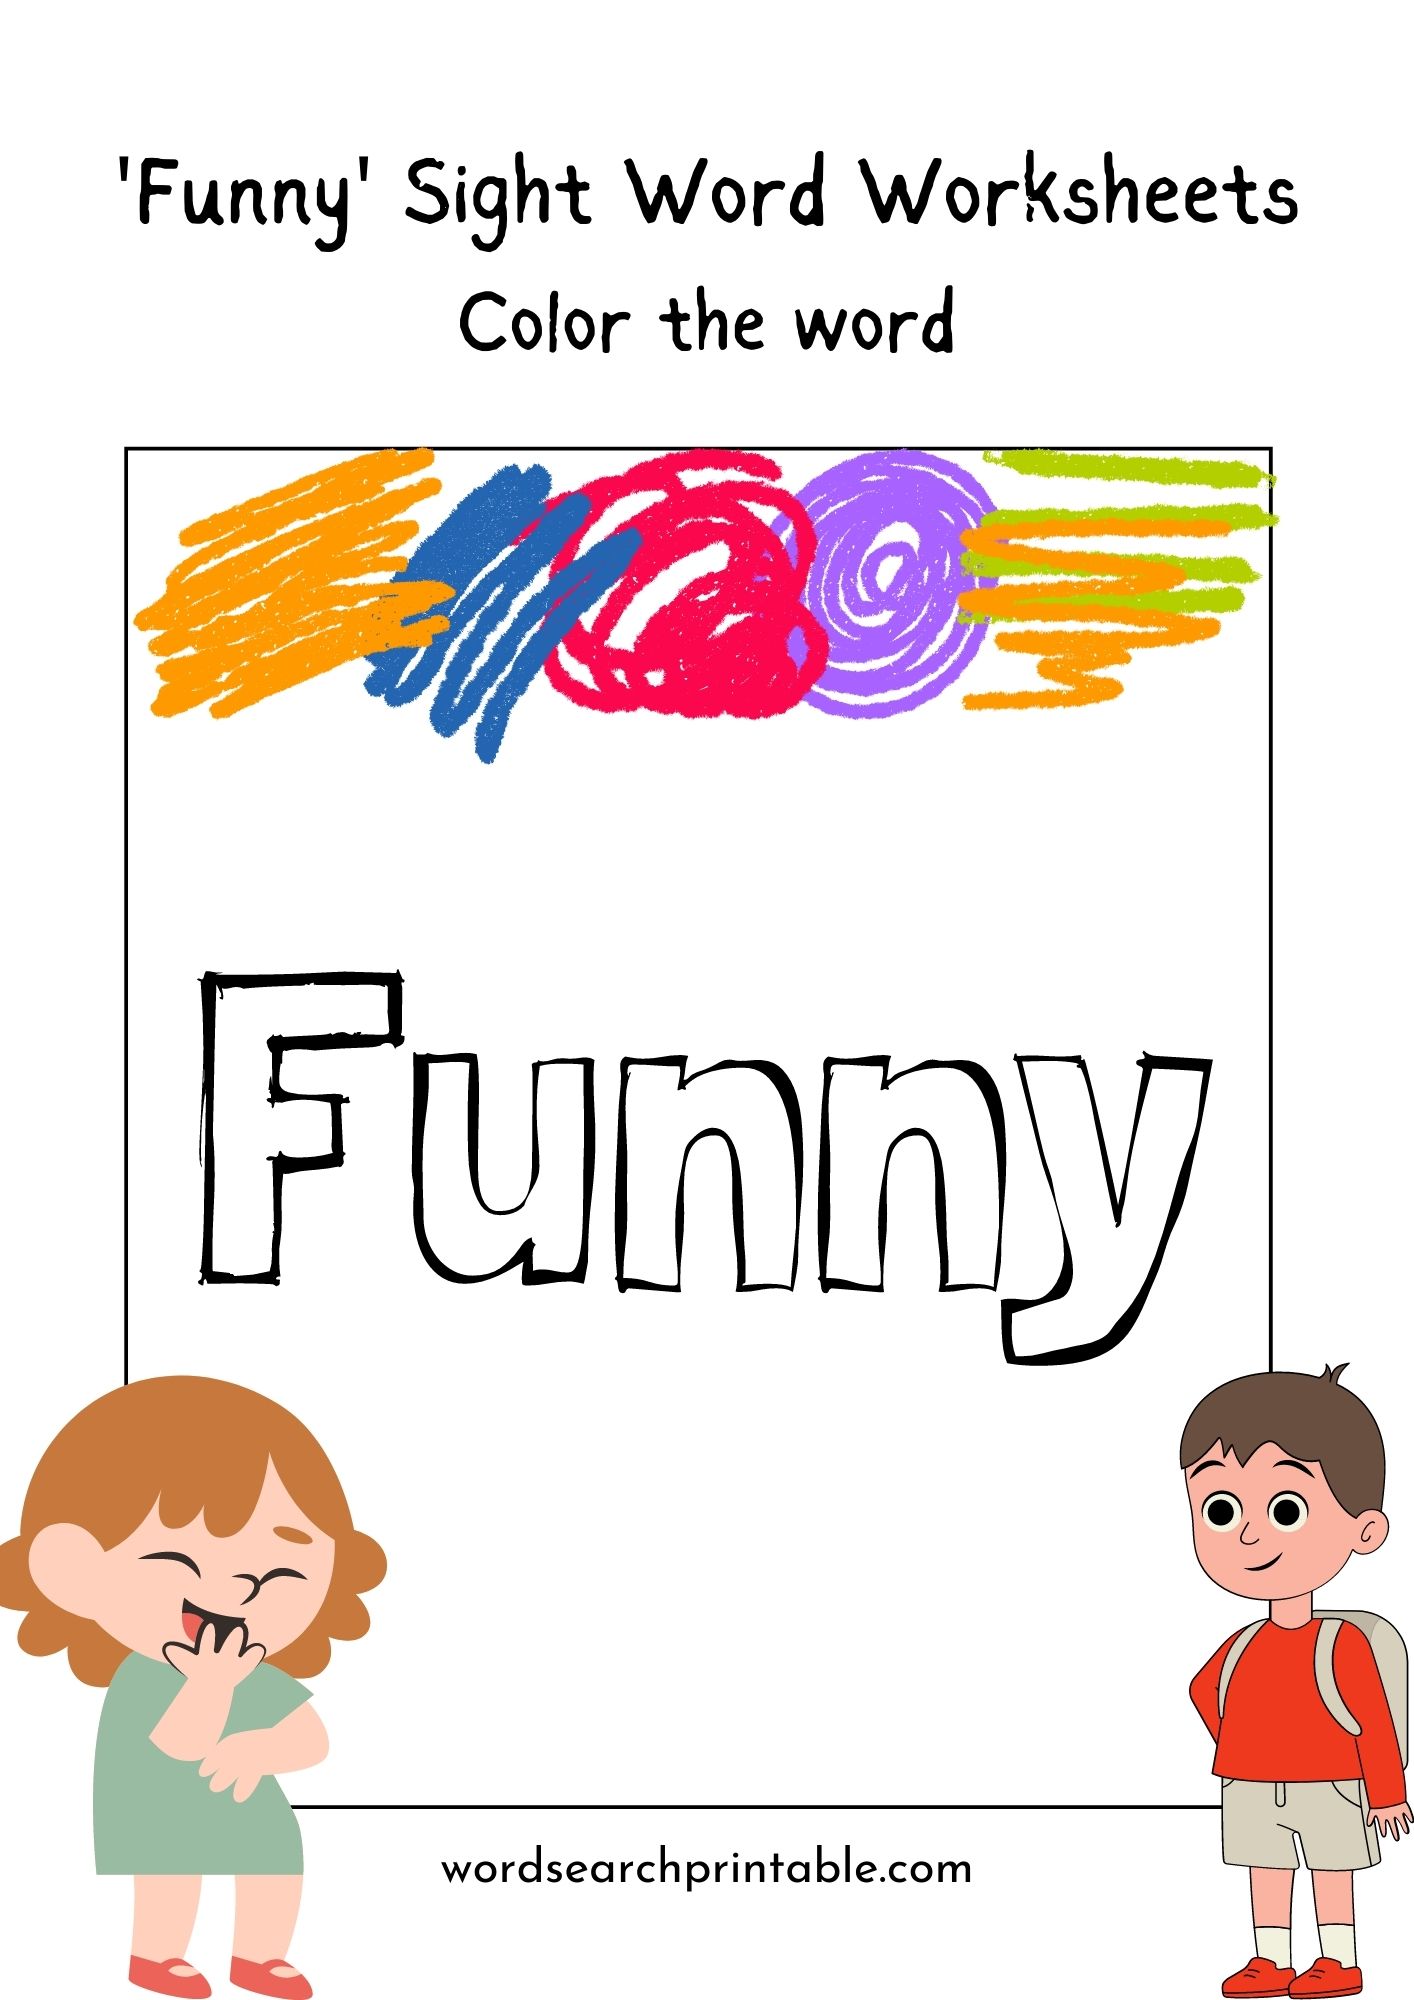 Color the Sight Word “Funny”